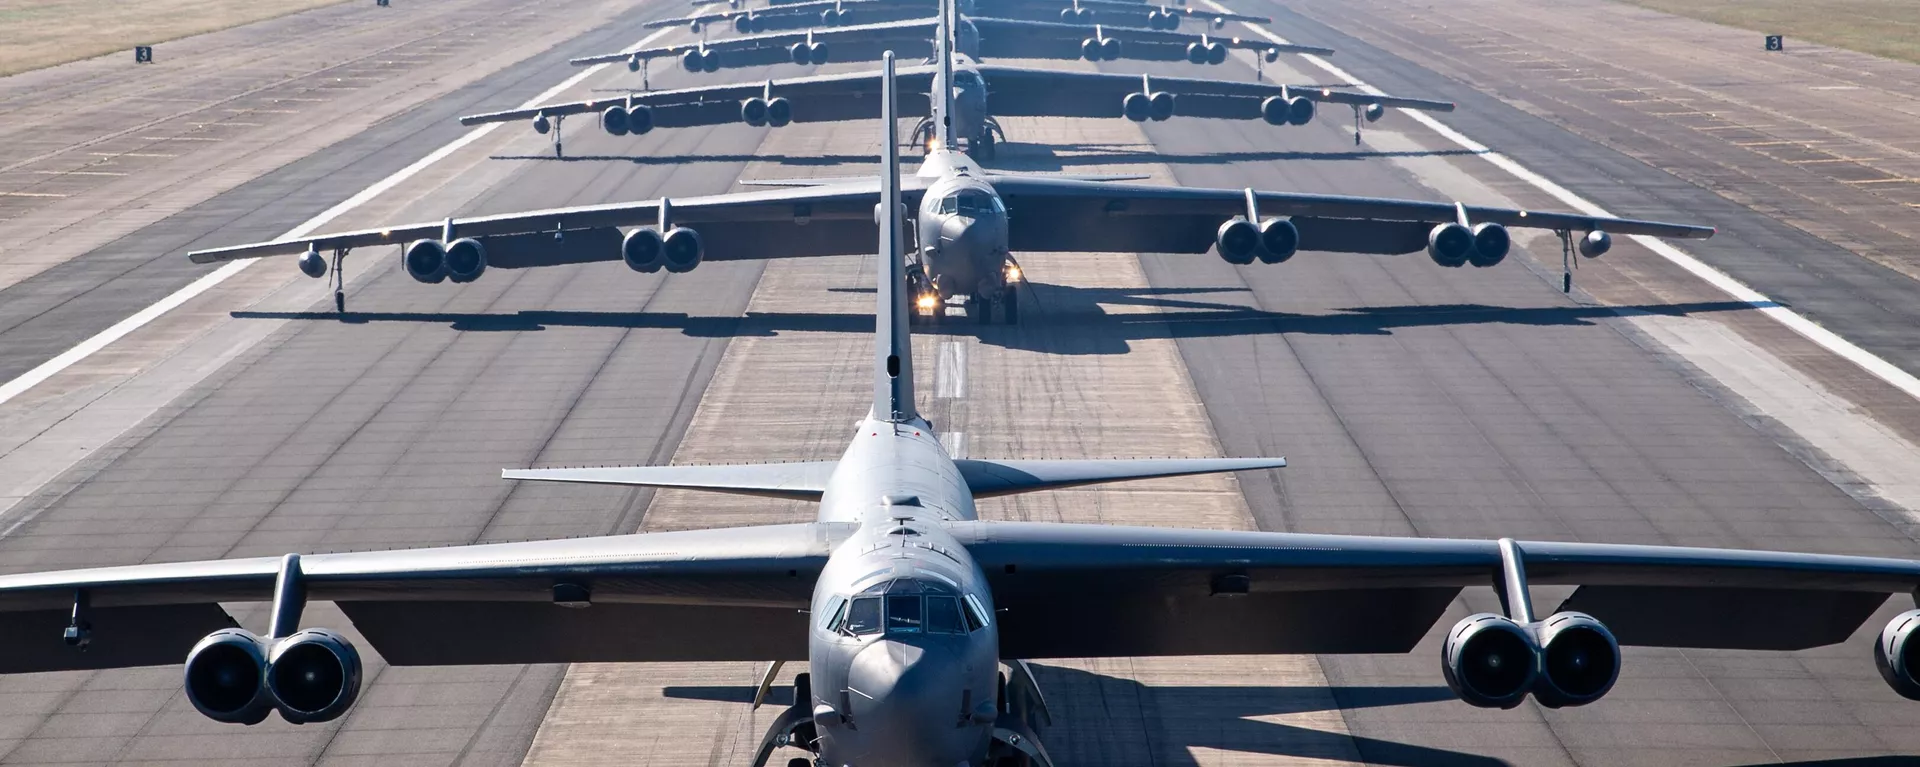 B-52H Stratofortresses from the 2nd Bomb Wing line up on the runway at Barksdale Air Force Base, La., Oct. 14, 2020. The B-52 is a long-range, heavy bomber that can perform a variety of missions and has been the backbone of U.S. strategic bomber forces for more than 60 years. - Sputnik International, 1920, 05.10.2023